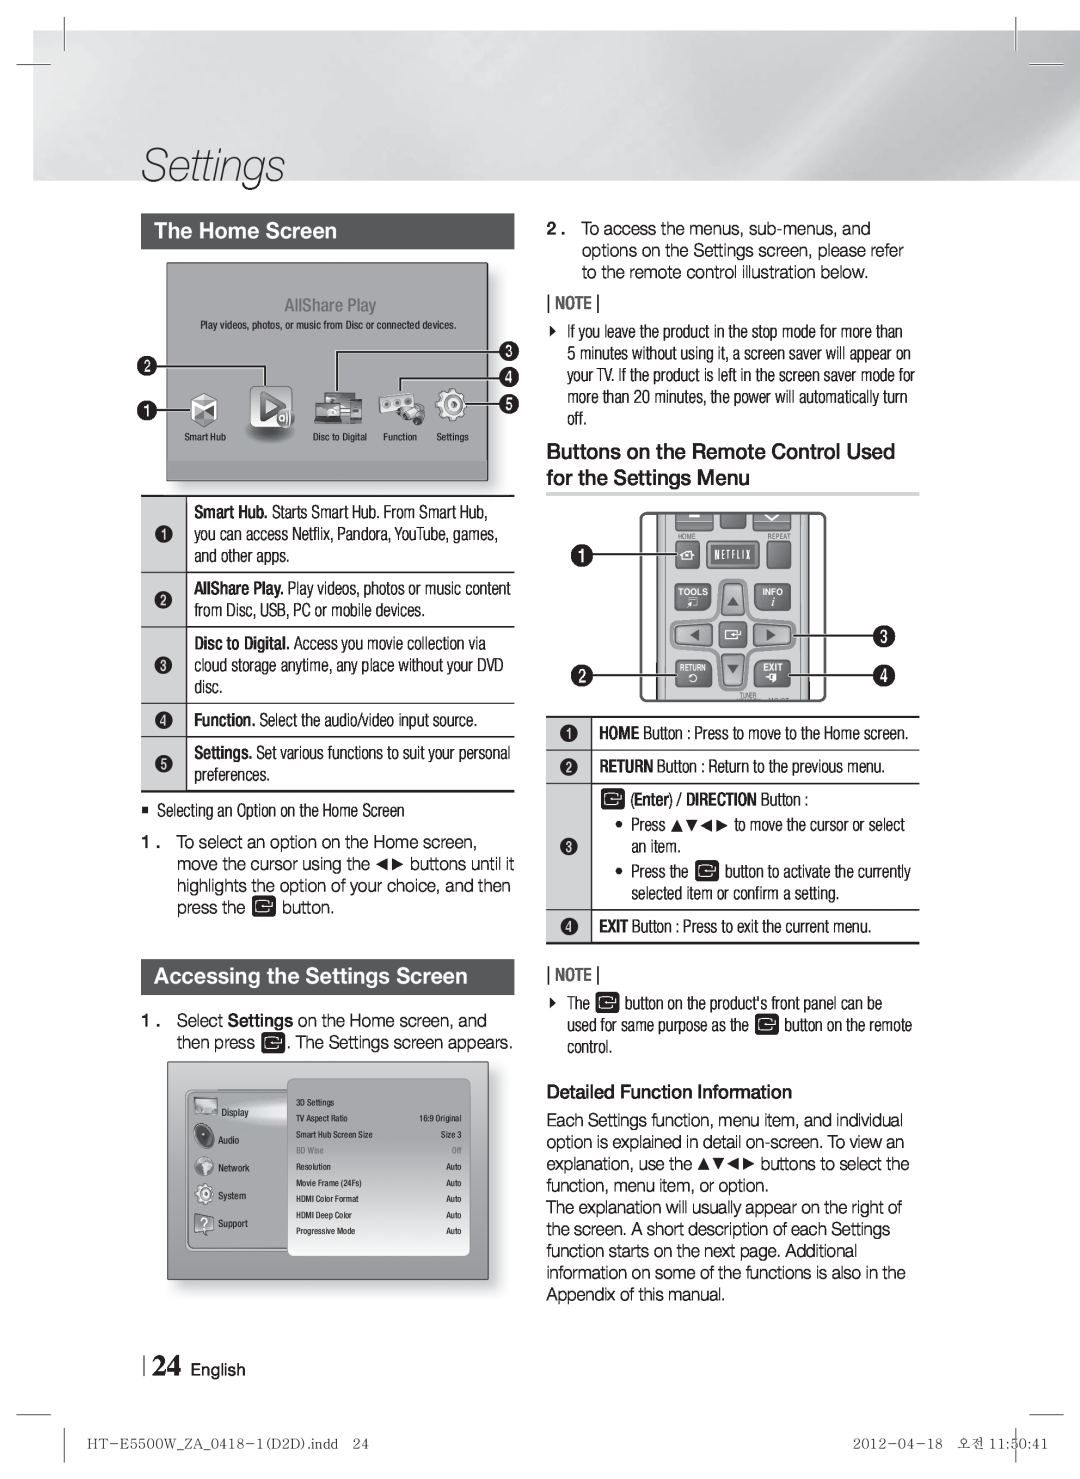 Samsung HT-E550 user manual The Home Screen, Accessing the Settings Screen, AllShare Play, Note 